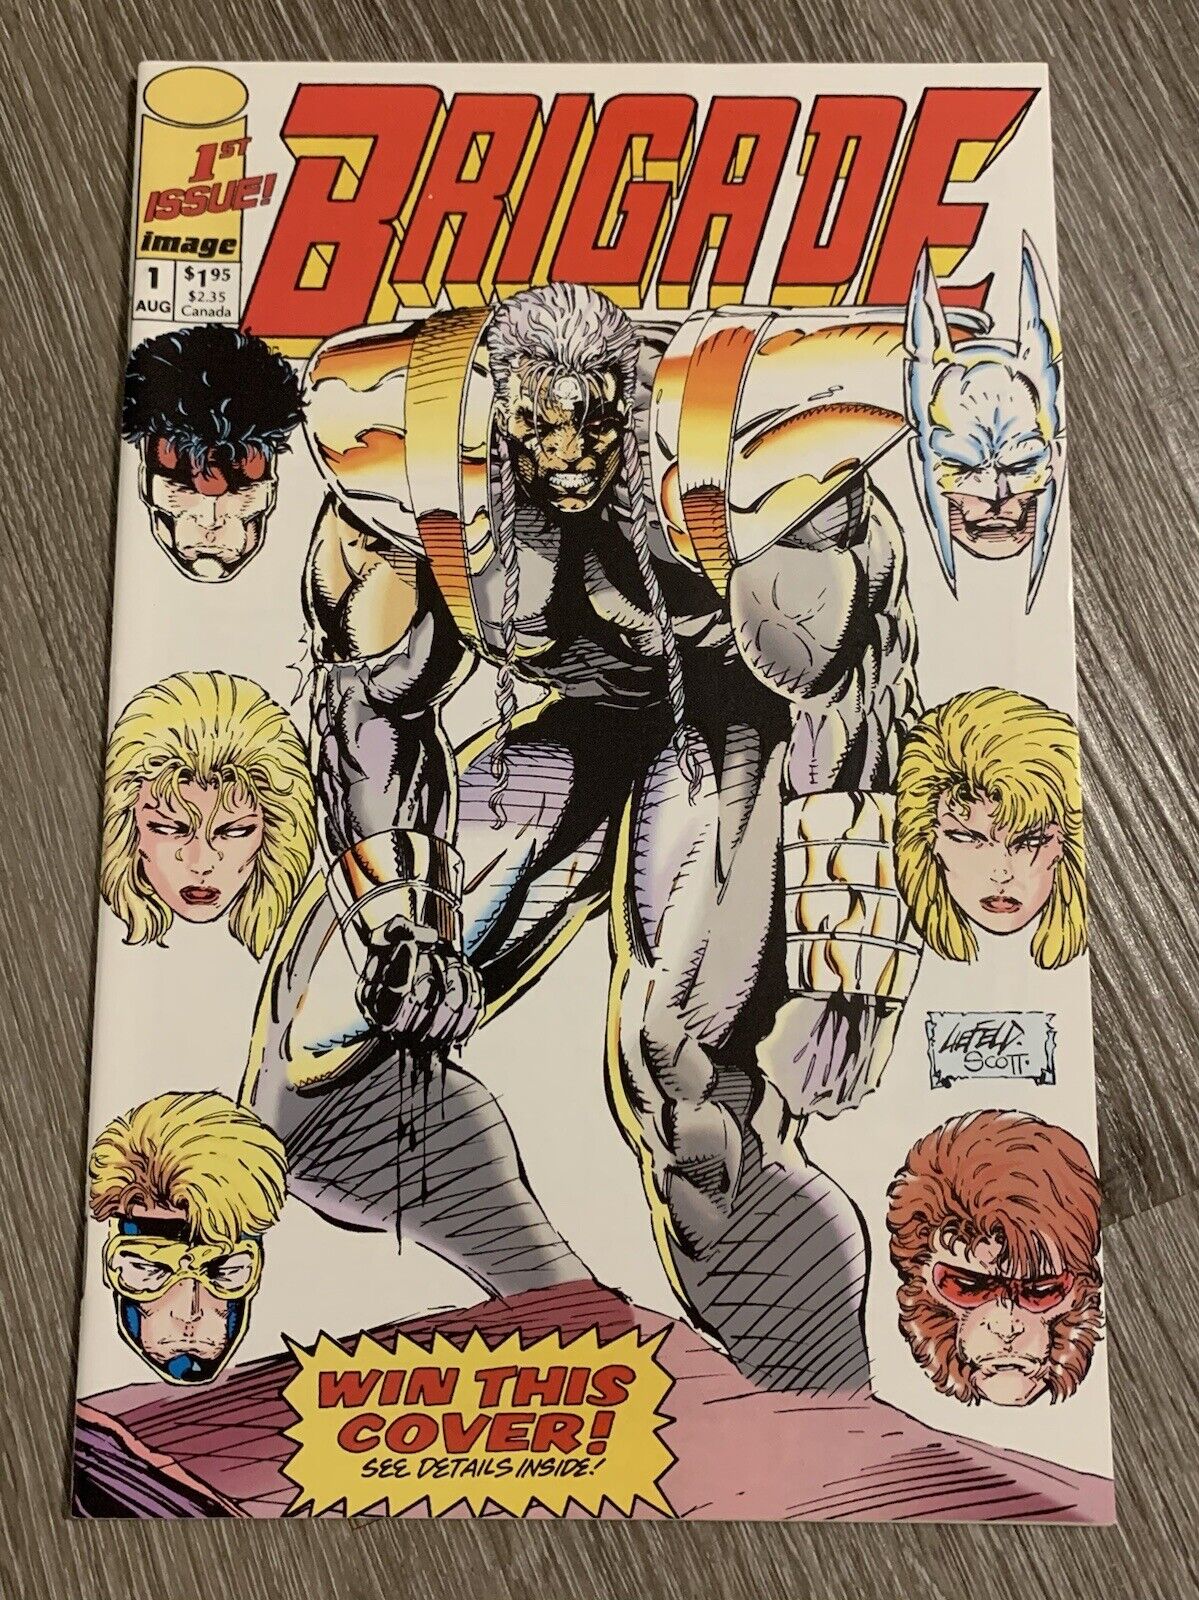 Brigade #1 August 1992 Comic Book First Printing NM Bagged Boarded Cards inside